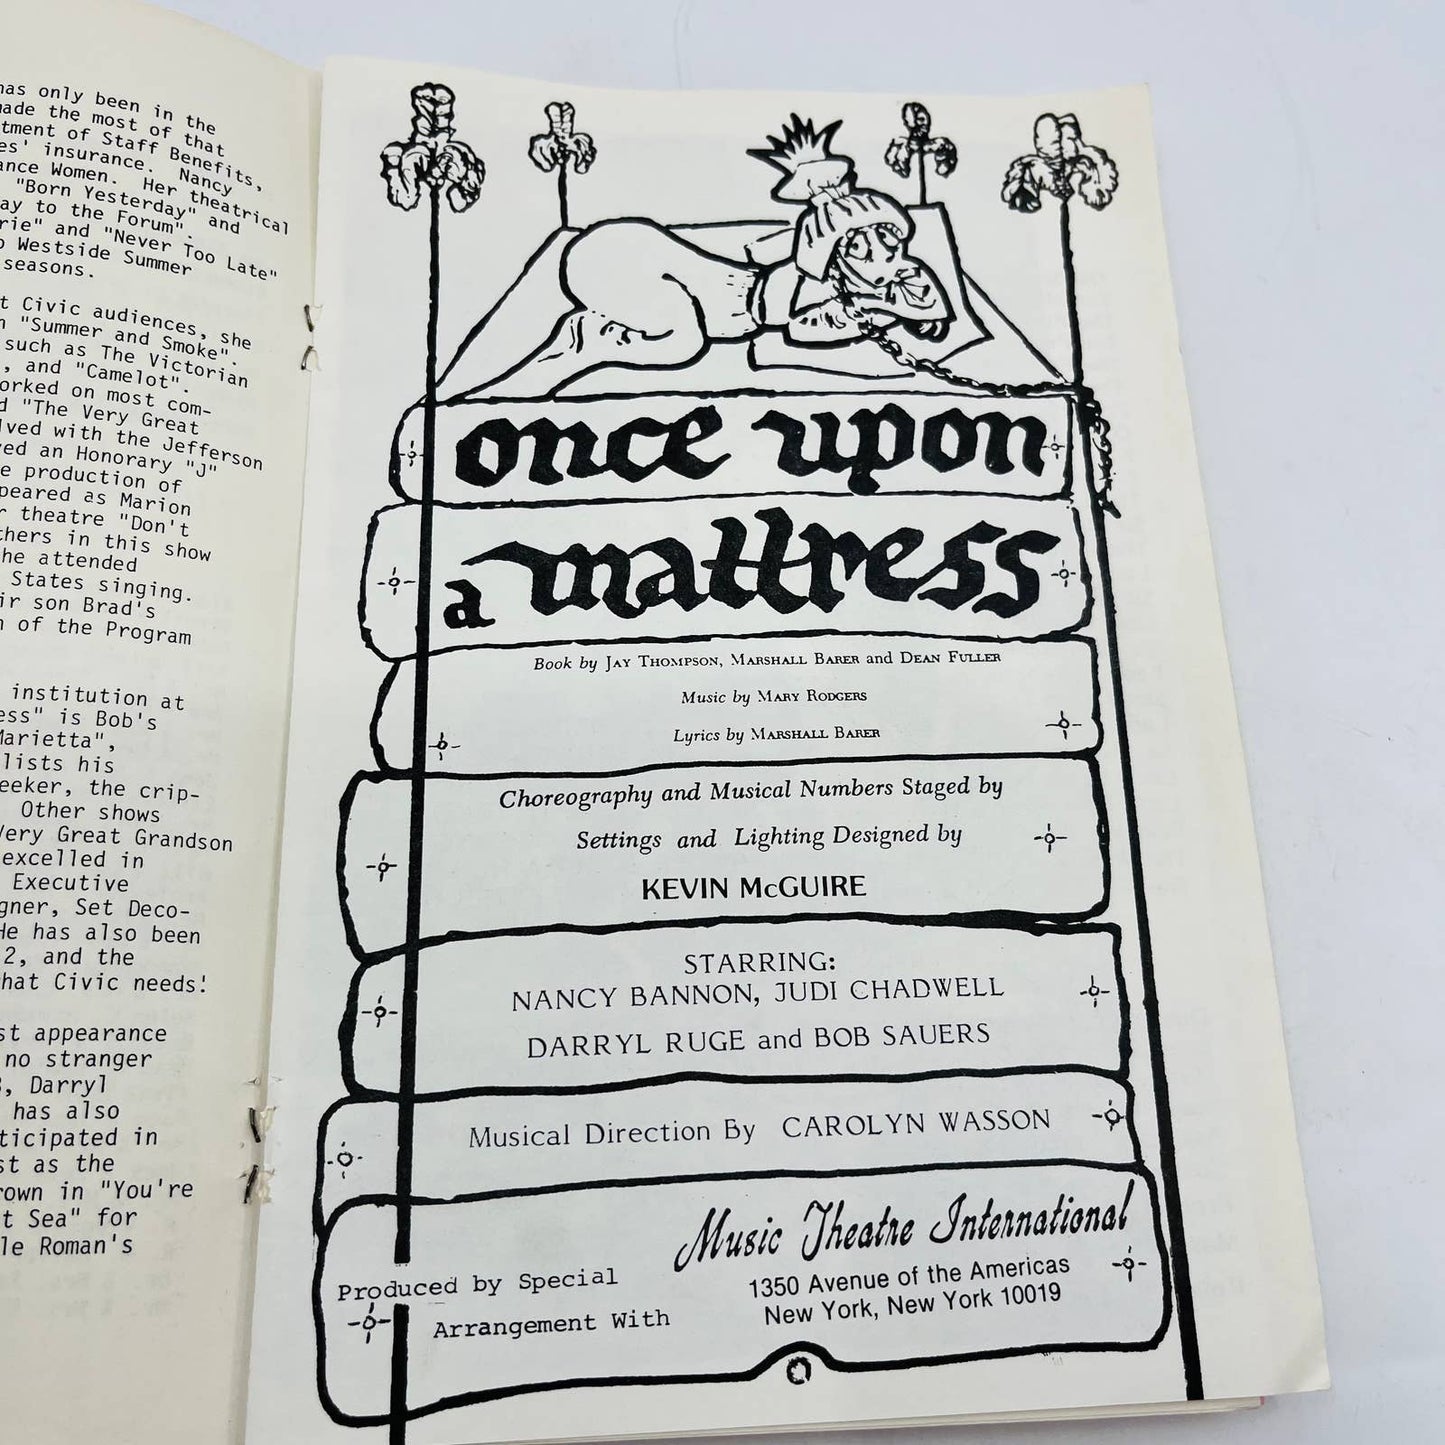 1983 Civic Theatre of Greater Lafayette Playbill ONCE UPON A MATTRESS C6